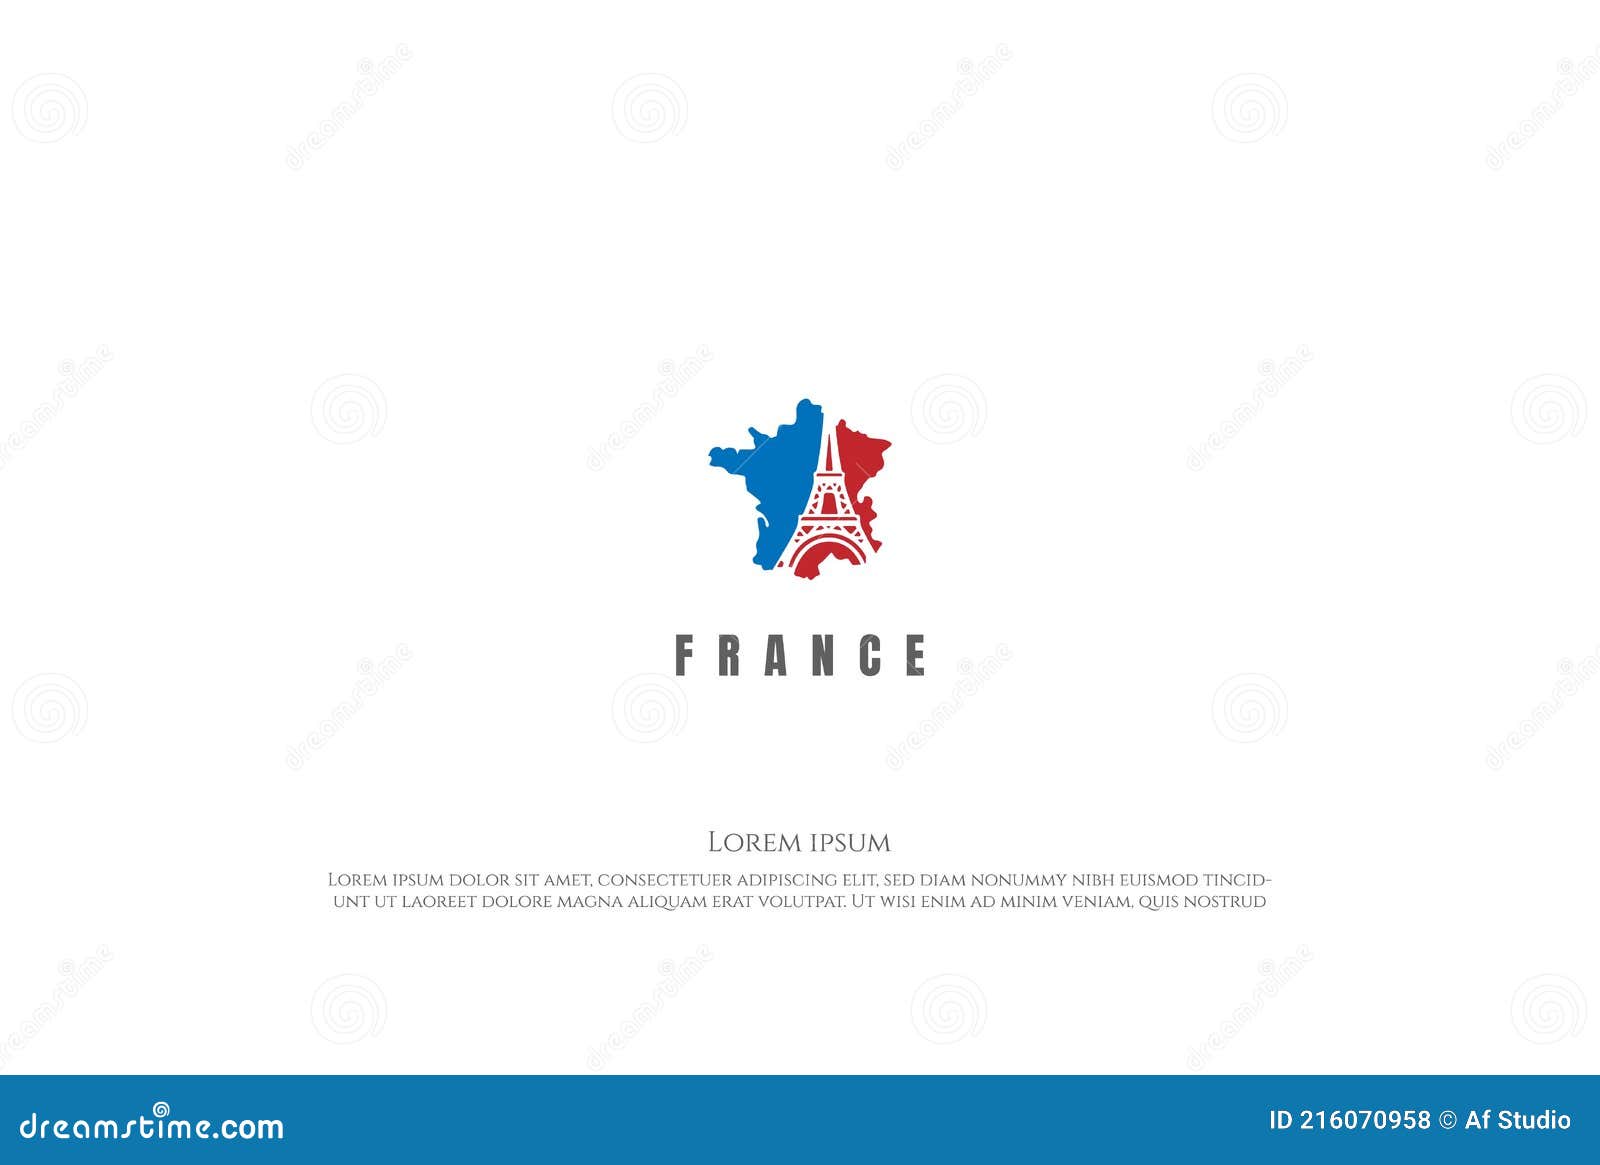 France Map with Paris Eiffel Tower for Travel Logo Design Vector Stock ...